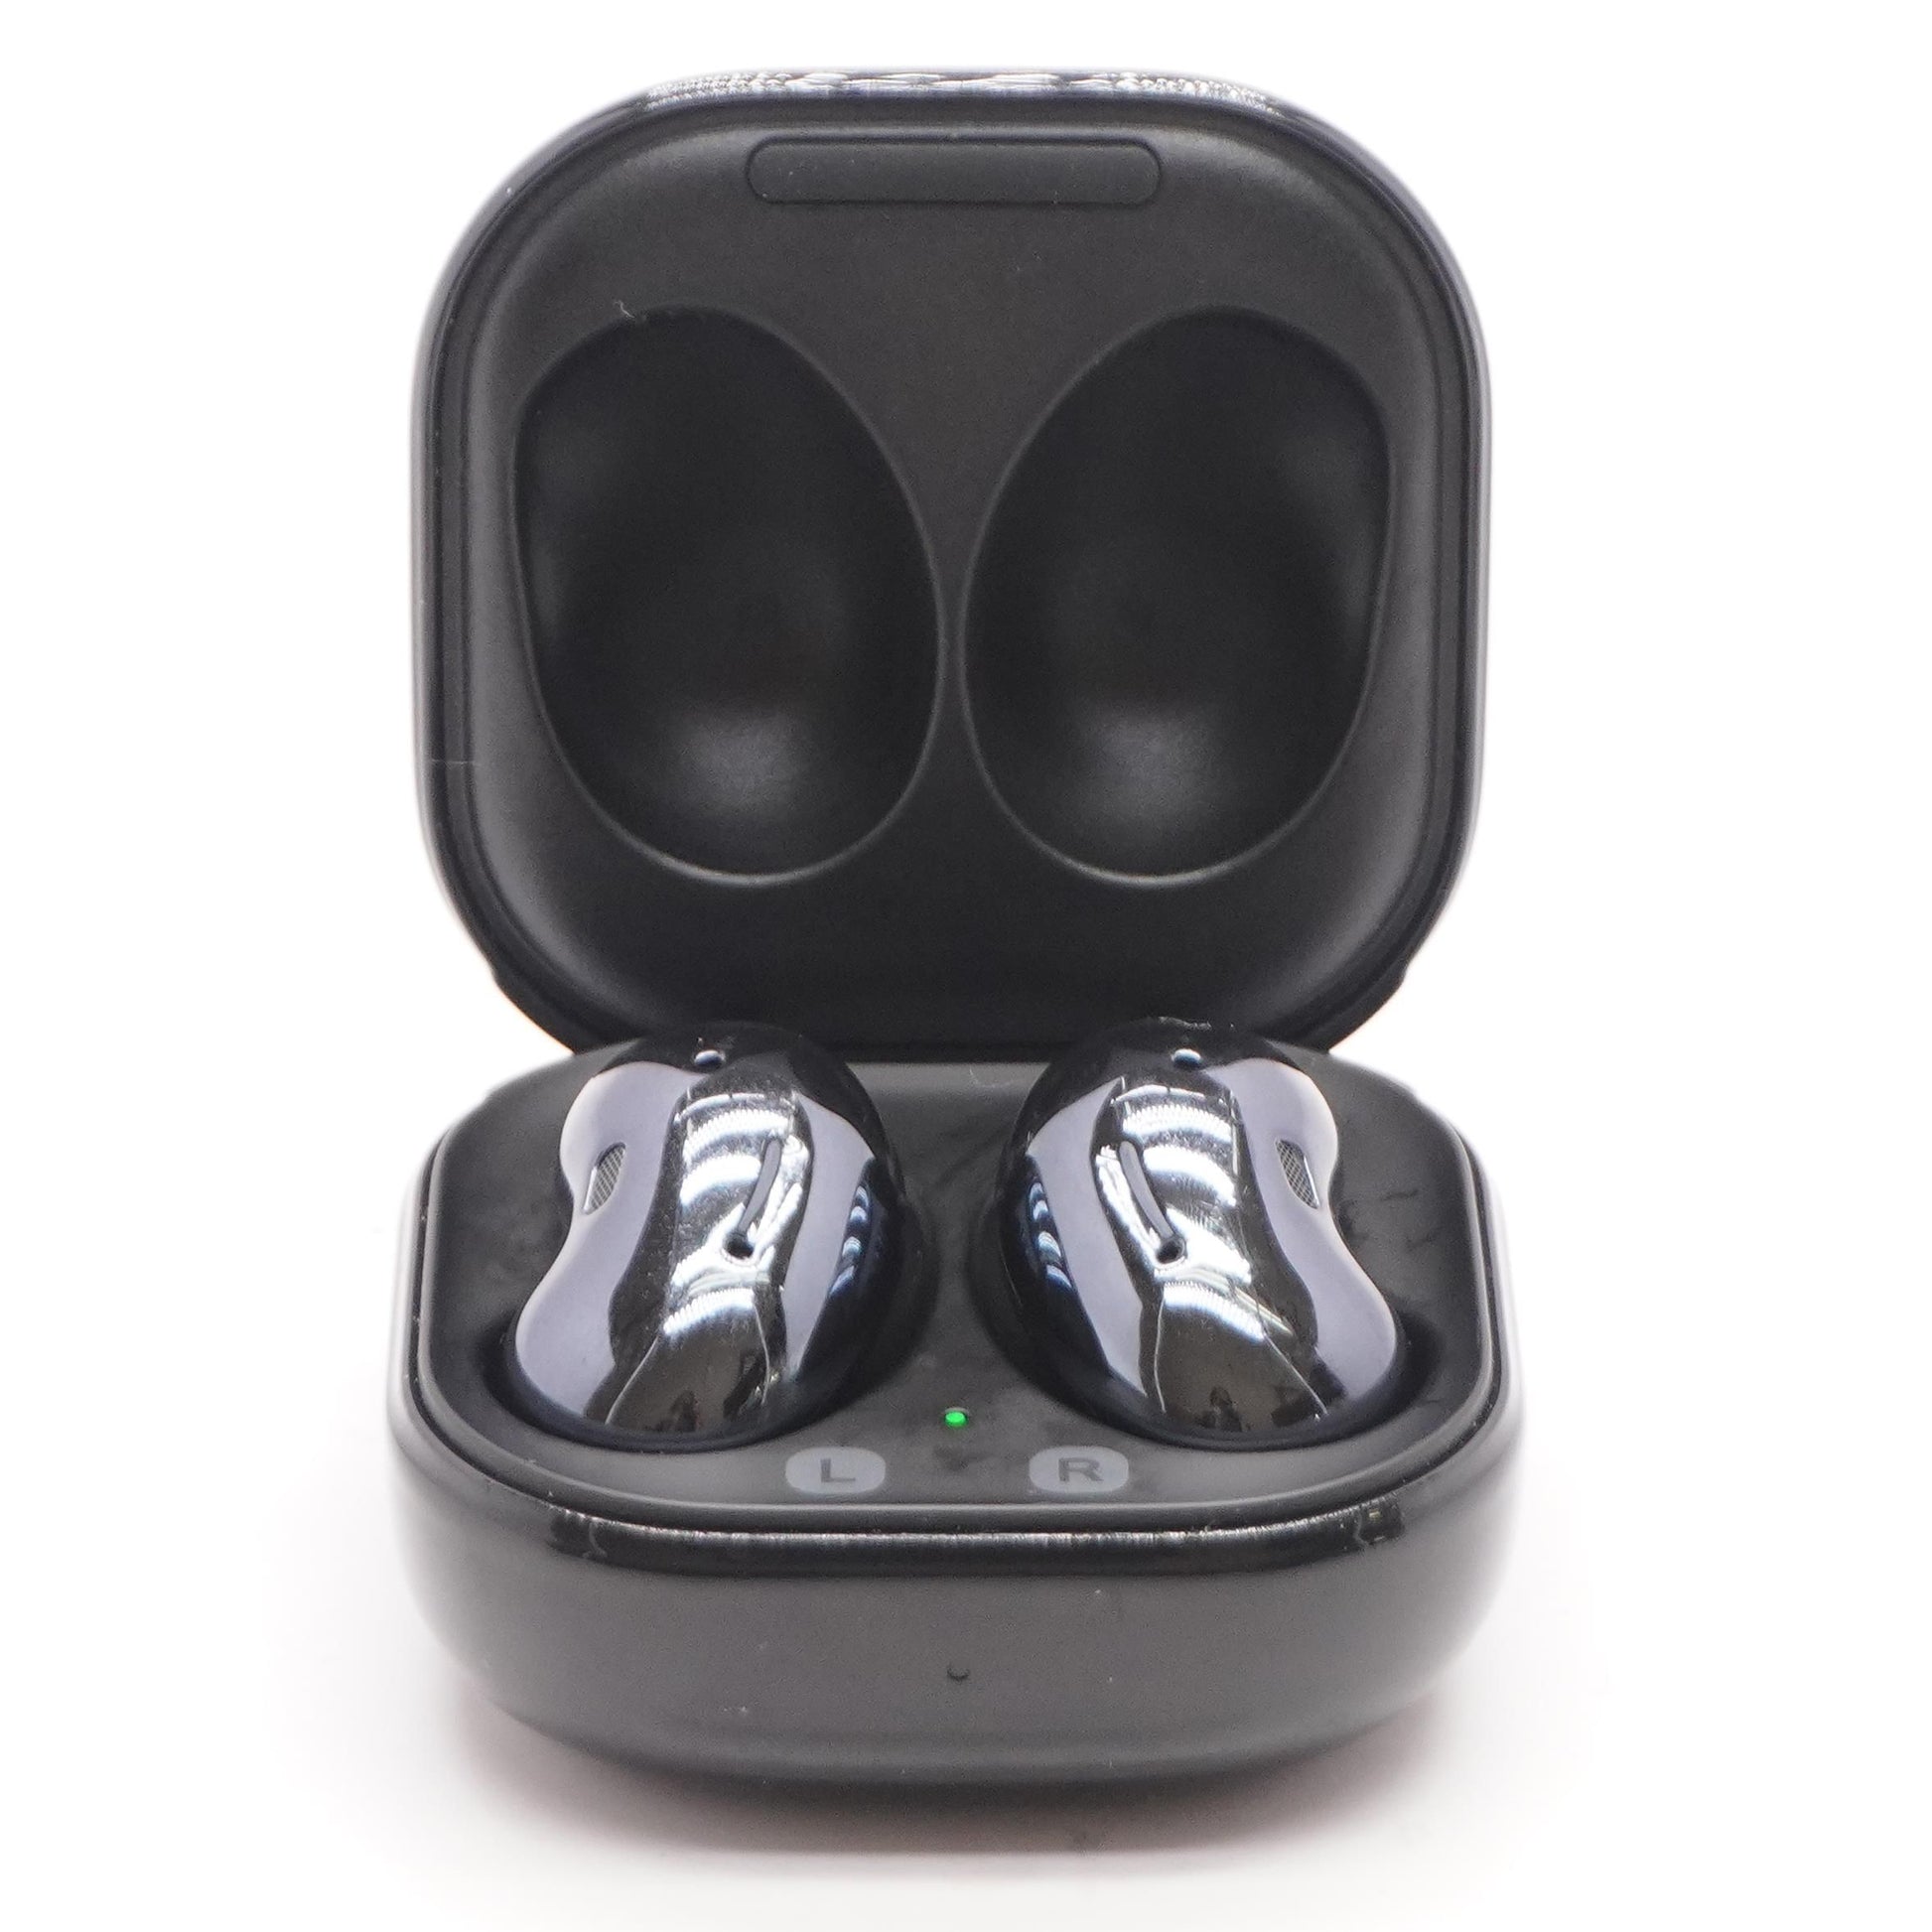 Samsung Galaxy Buds Live Wireless Earbuds with Charging Case, Mystic Black